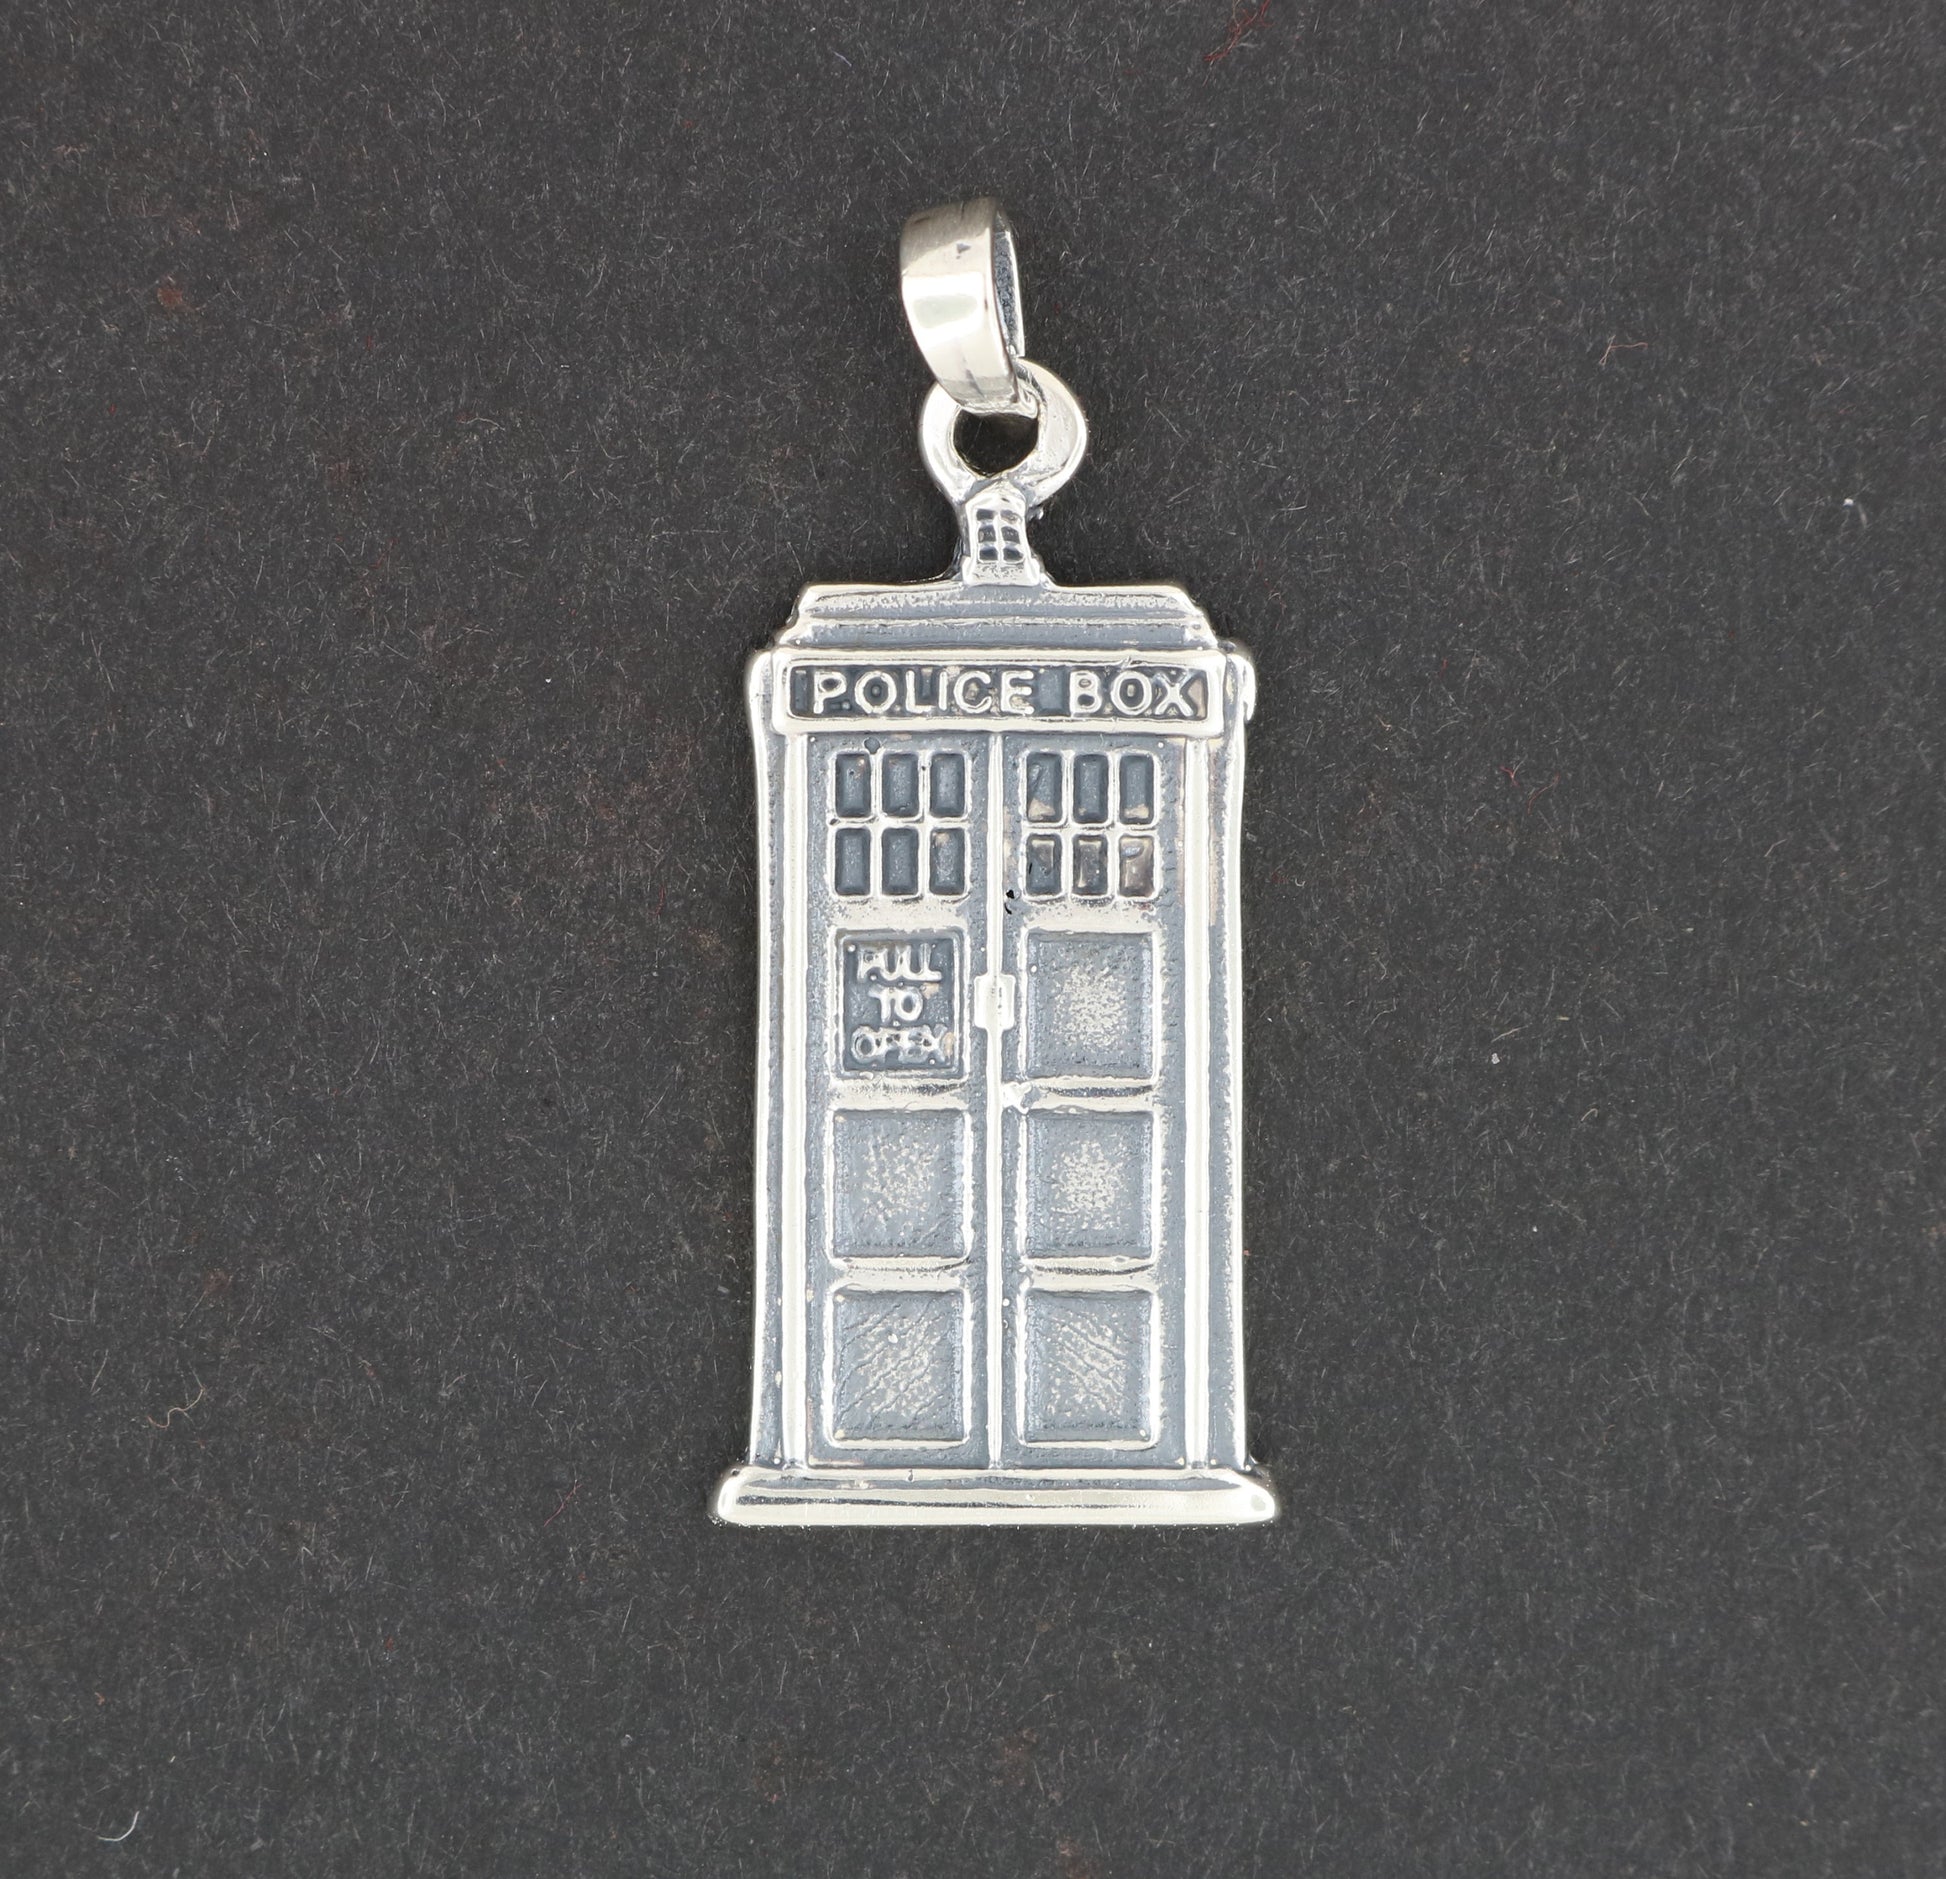 Handmade Tardis Charm Pendant from Dr Who, Dr Who Pendant, Sci-Fi Pendant, Phone Box Pendant, Police Box Pendant, Phone Box Charm, Sci fi Charm Pendant, Dr Who Tardis Pendant, Tardis Charm Pendant, Silver Sci-fi Jewelry, Silver Tardis Pendant